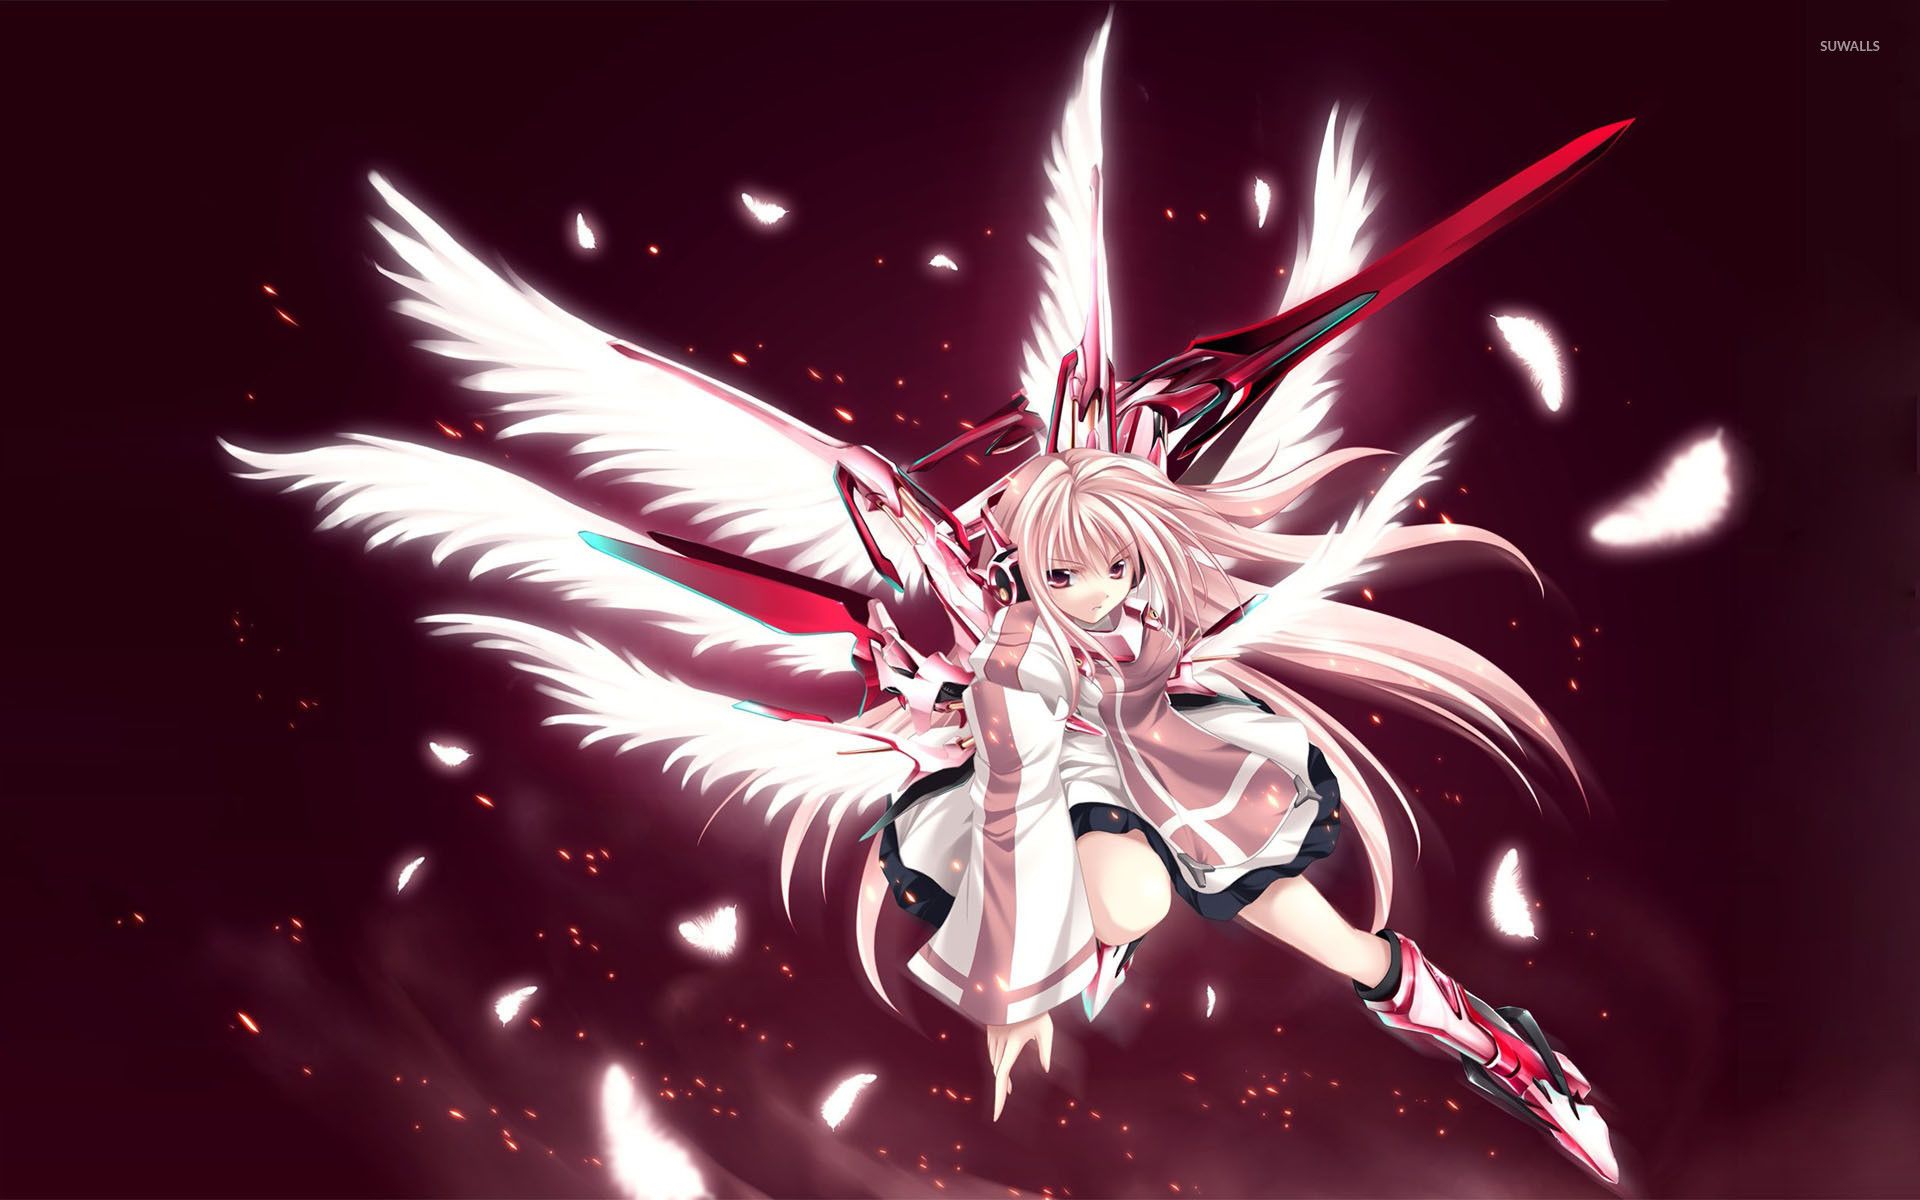 Res: 1920x Angel with a red sword wallpaper. Anime angel, Anime, Hình ảnh